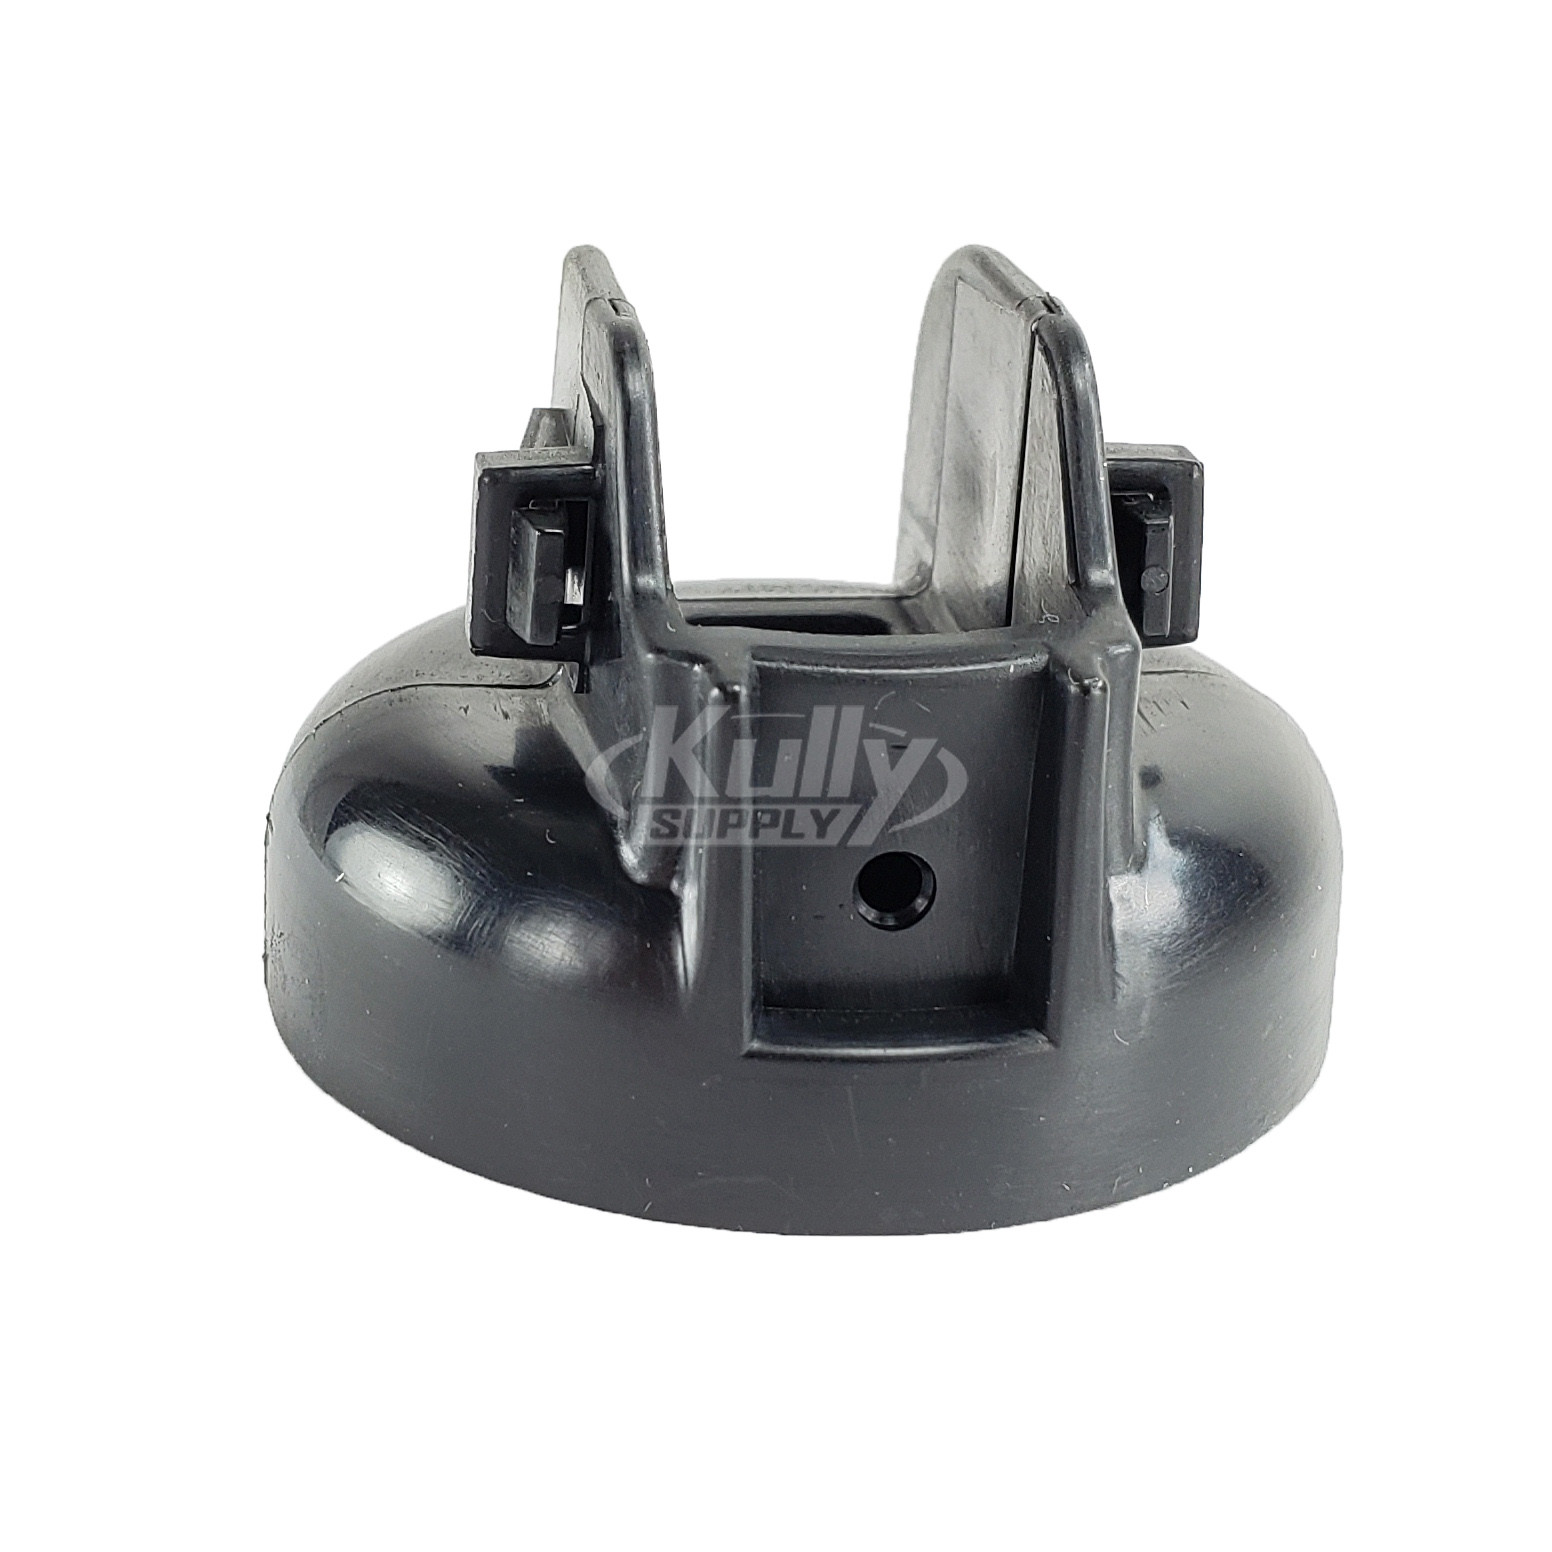 Chicago 2200-021KJKNF Cartridge Spin Cap Assembly